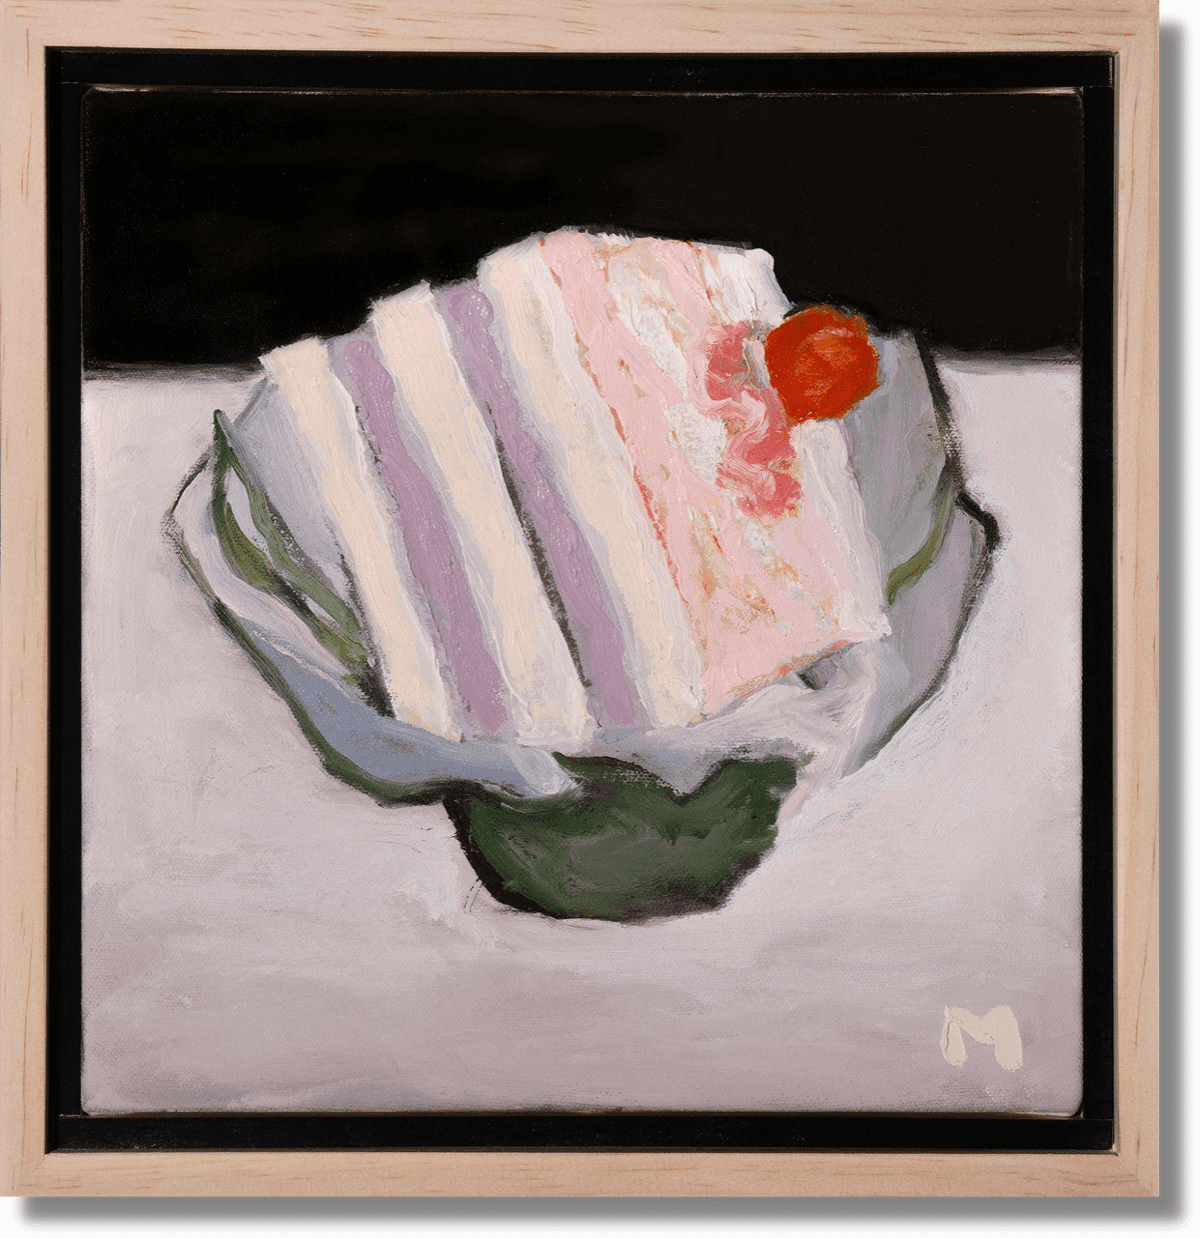 JUBILEE #1 | 10″ x 10″, oil on canvas, framed in a natural floating frame by Dallas Mosman | $300